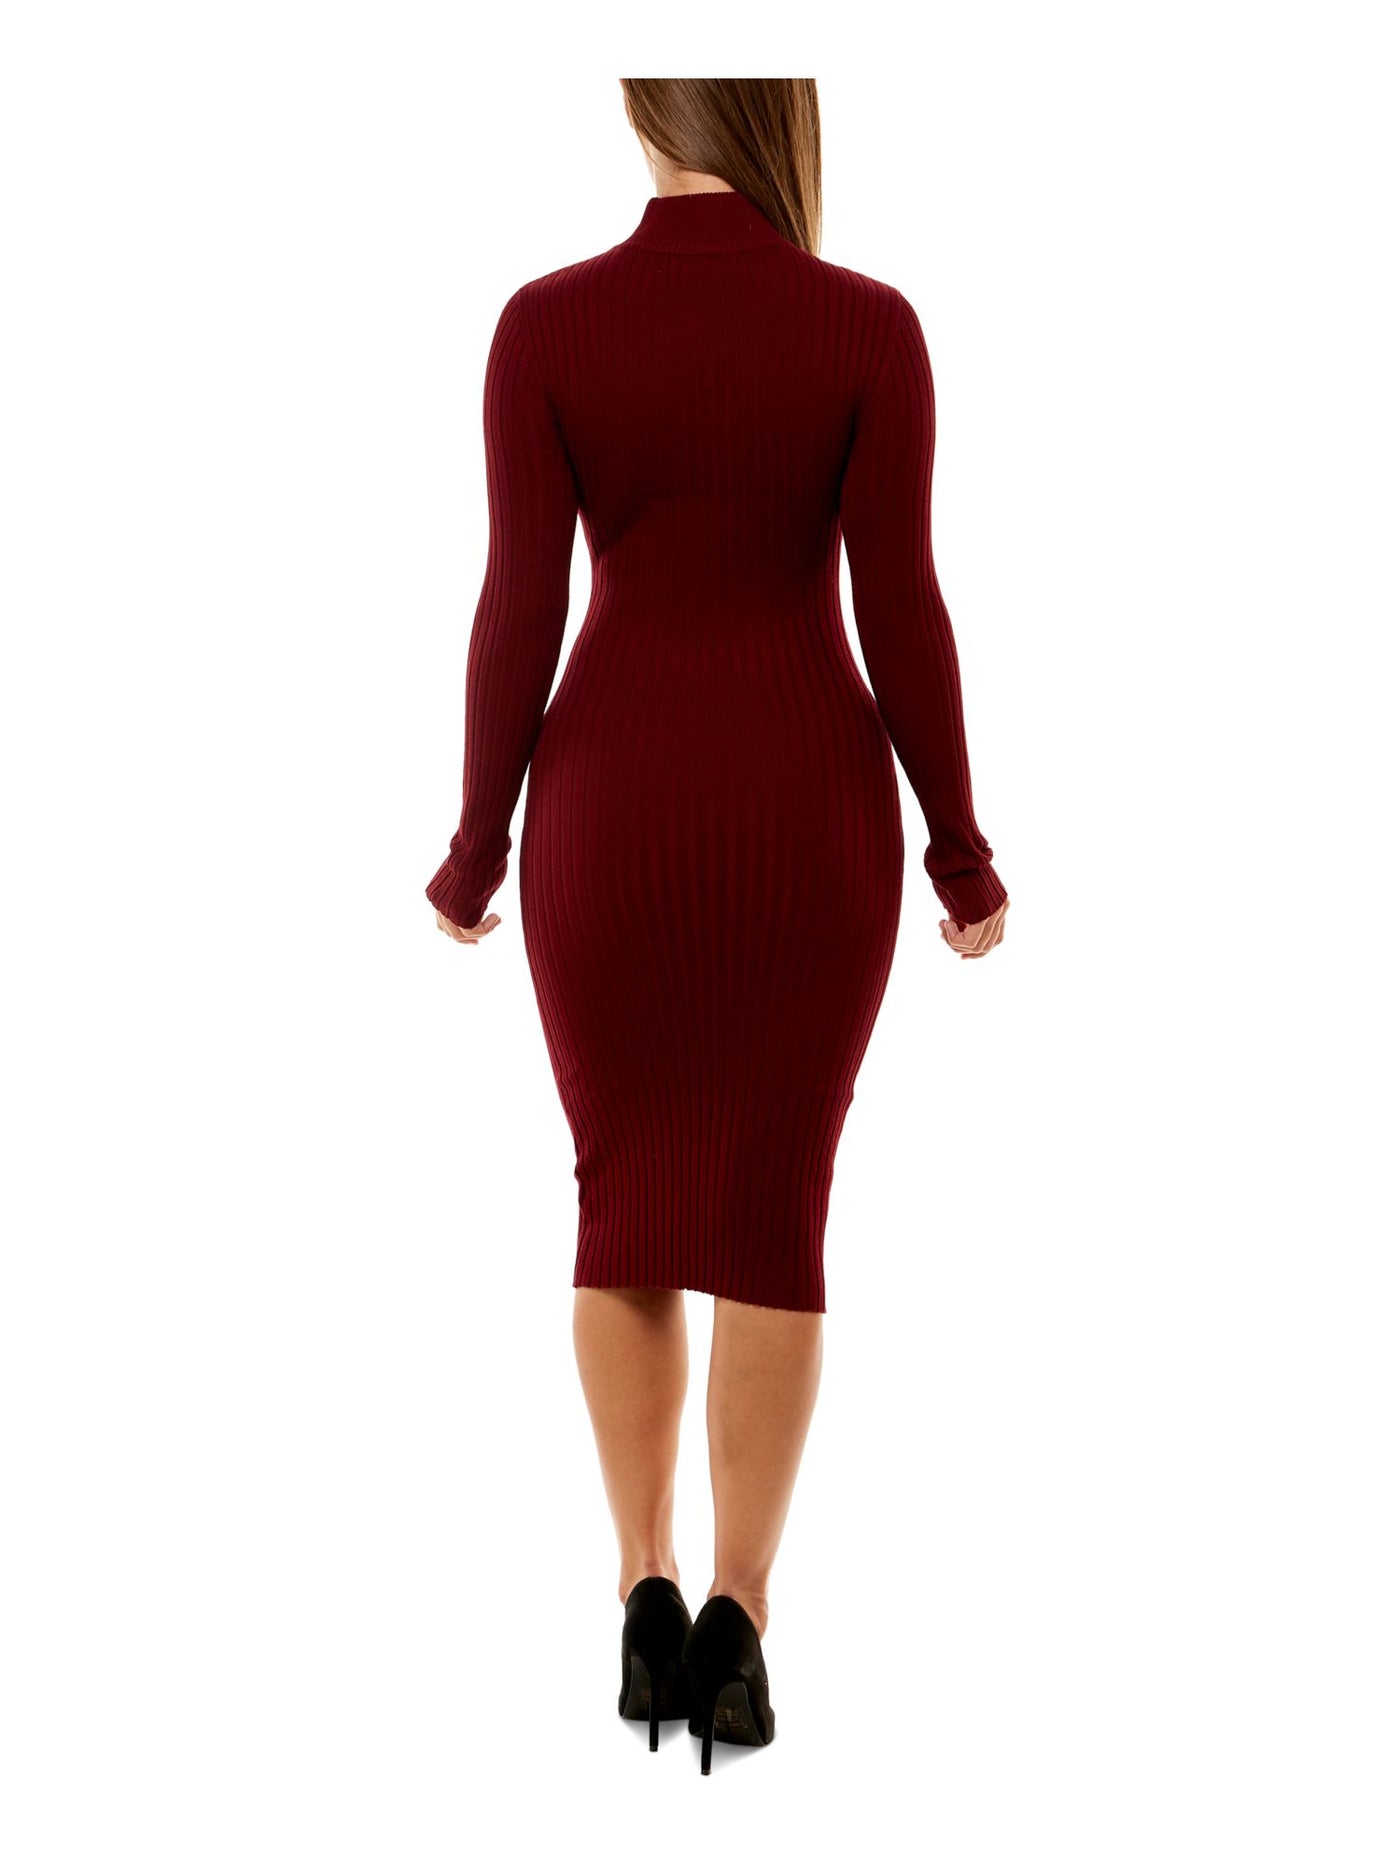 CRAVE FAME Womens Burgundy Ribbed Cut Out Long Sleeve Mock Neck Below The Knee Party Body Con Dress Juniors M